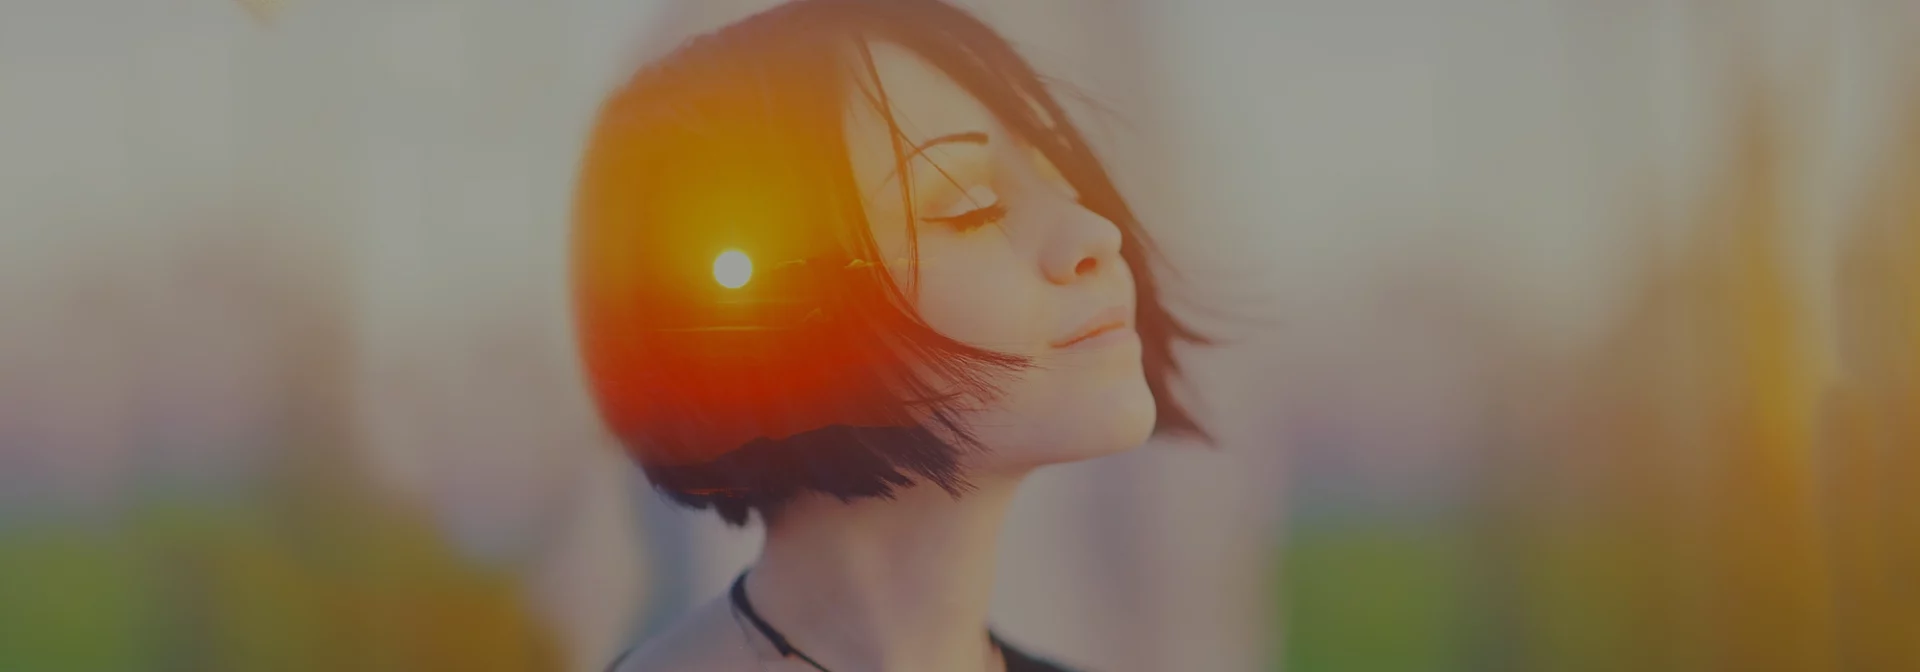 Image of young woman with sun overlay on head. Image of healthy mind